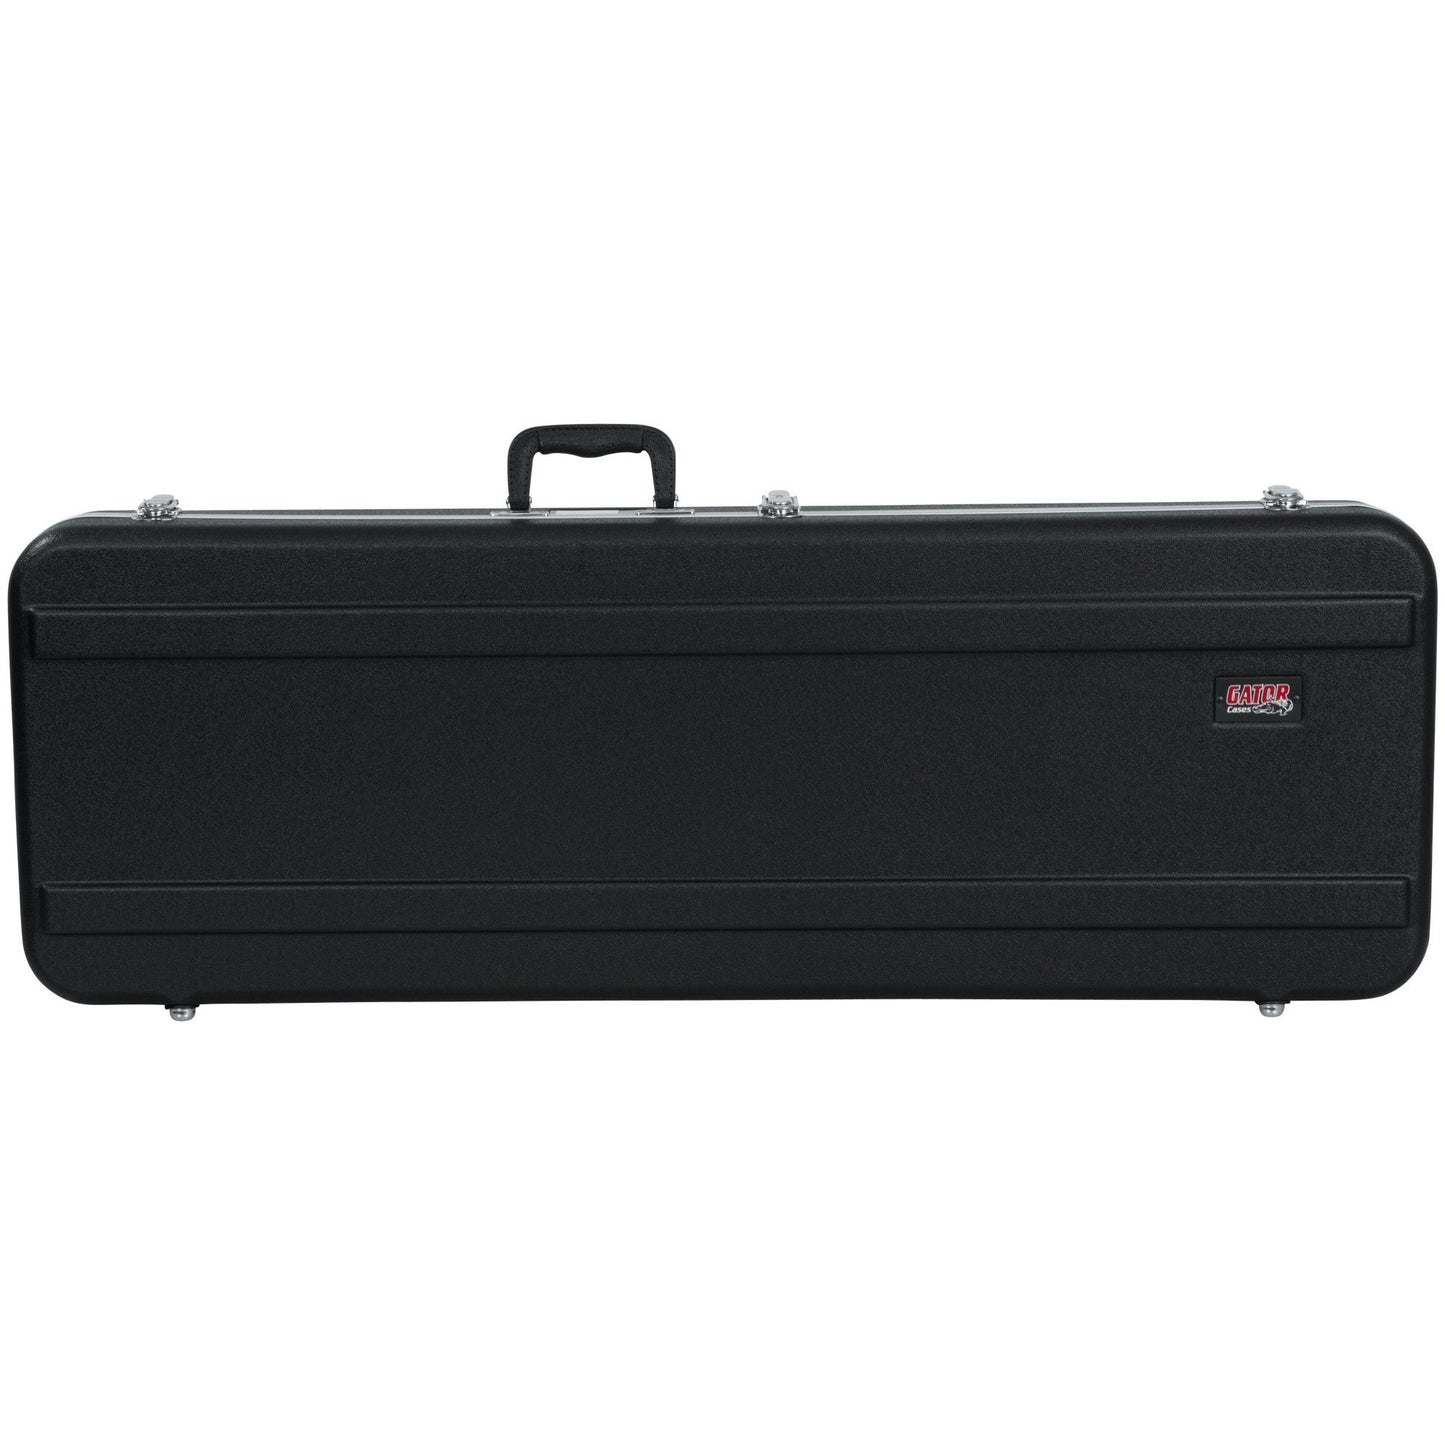 Gator GC-ELEC-XL Deluxe ABS Extra Long Fit-All Electric Guitar Case